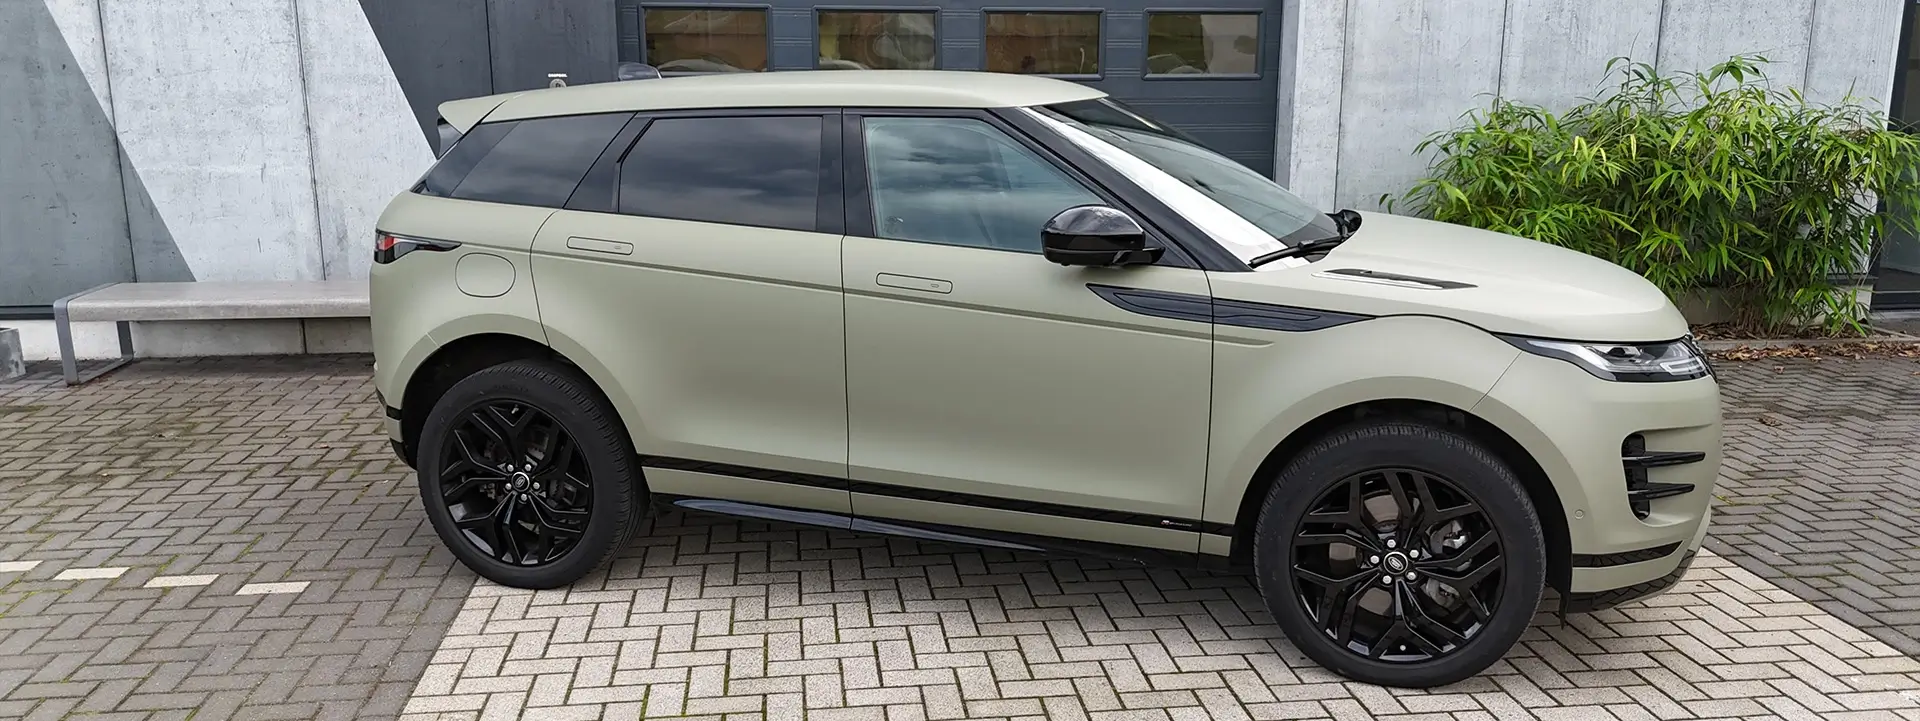 Carwrapping: wrap een customize je wagen